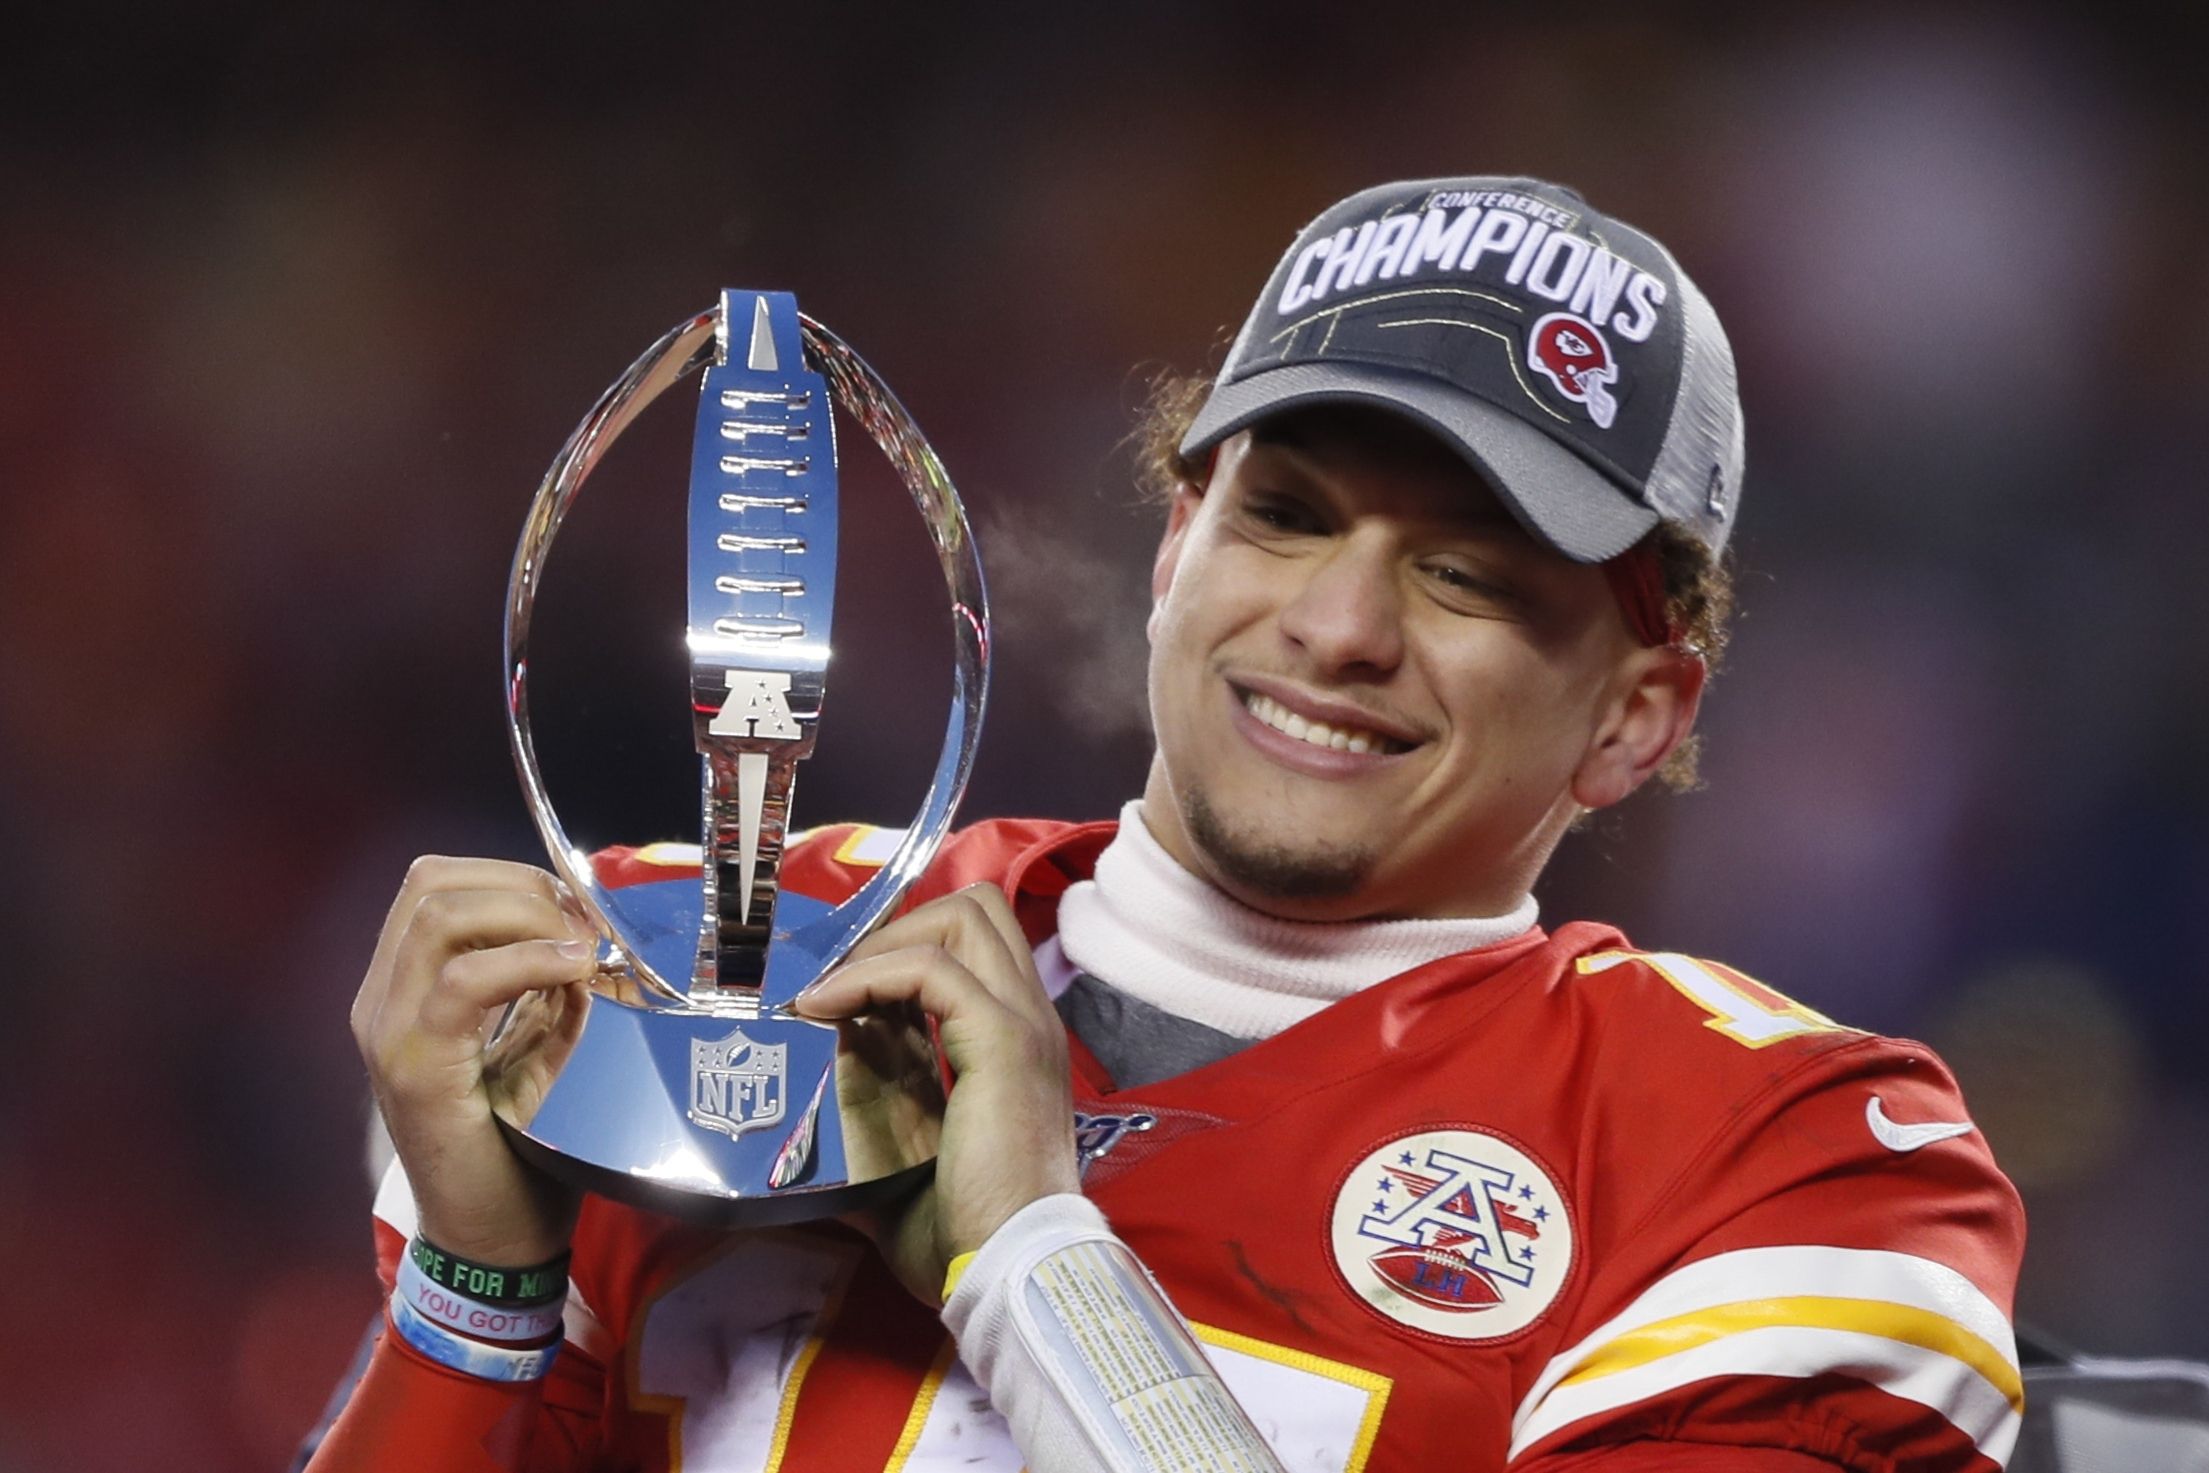 The Kansas City Chiefs are headed to their 3rd Super Bowl in 4 years